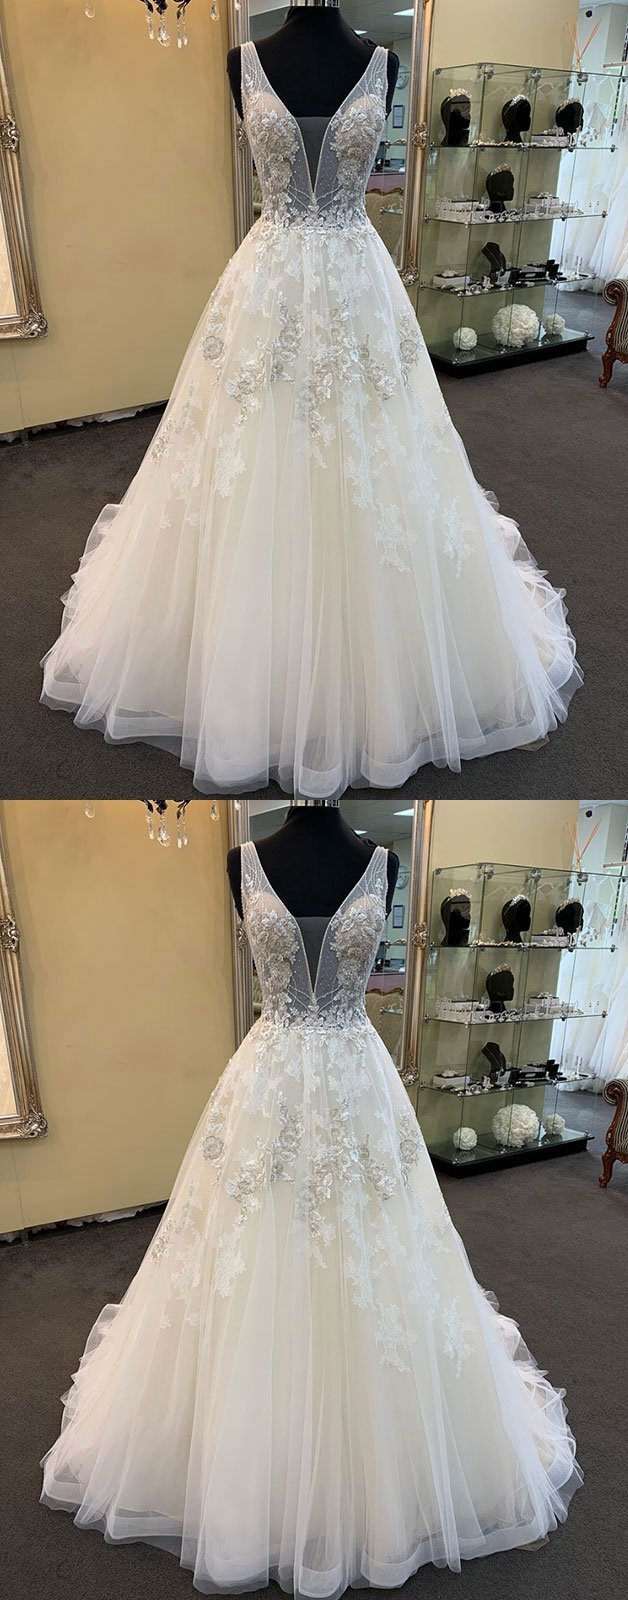 Wedding Dress With Lace, Unique Long A-line Tulle V Neck Beaded Lace Wedding Dress